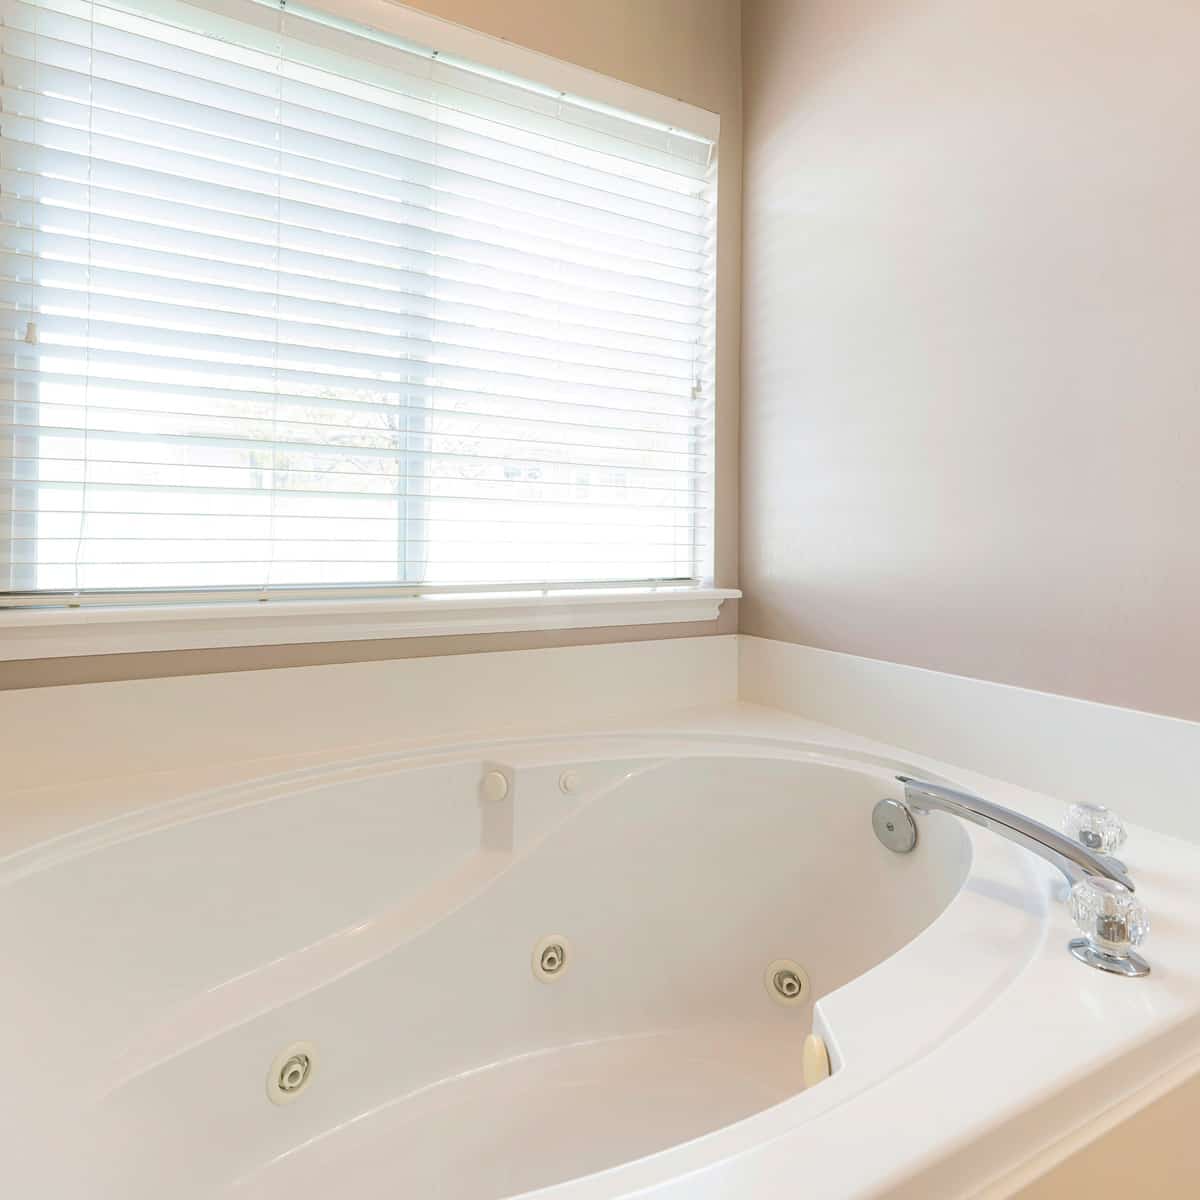 Square Drop-in bathtub in a bathroom with windows and blinds.